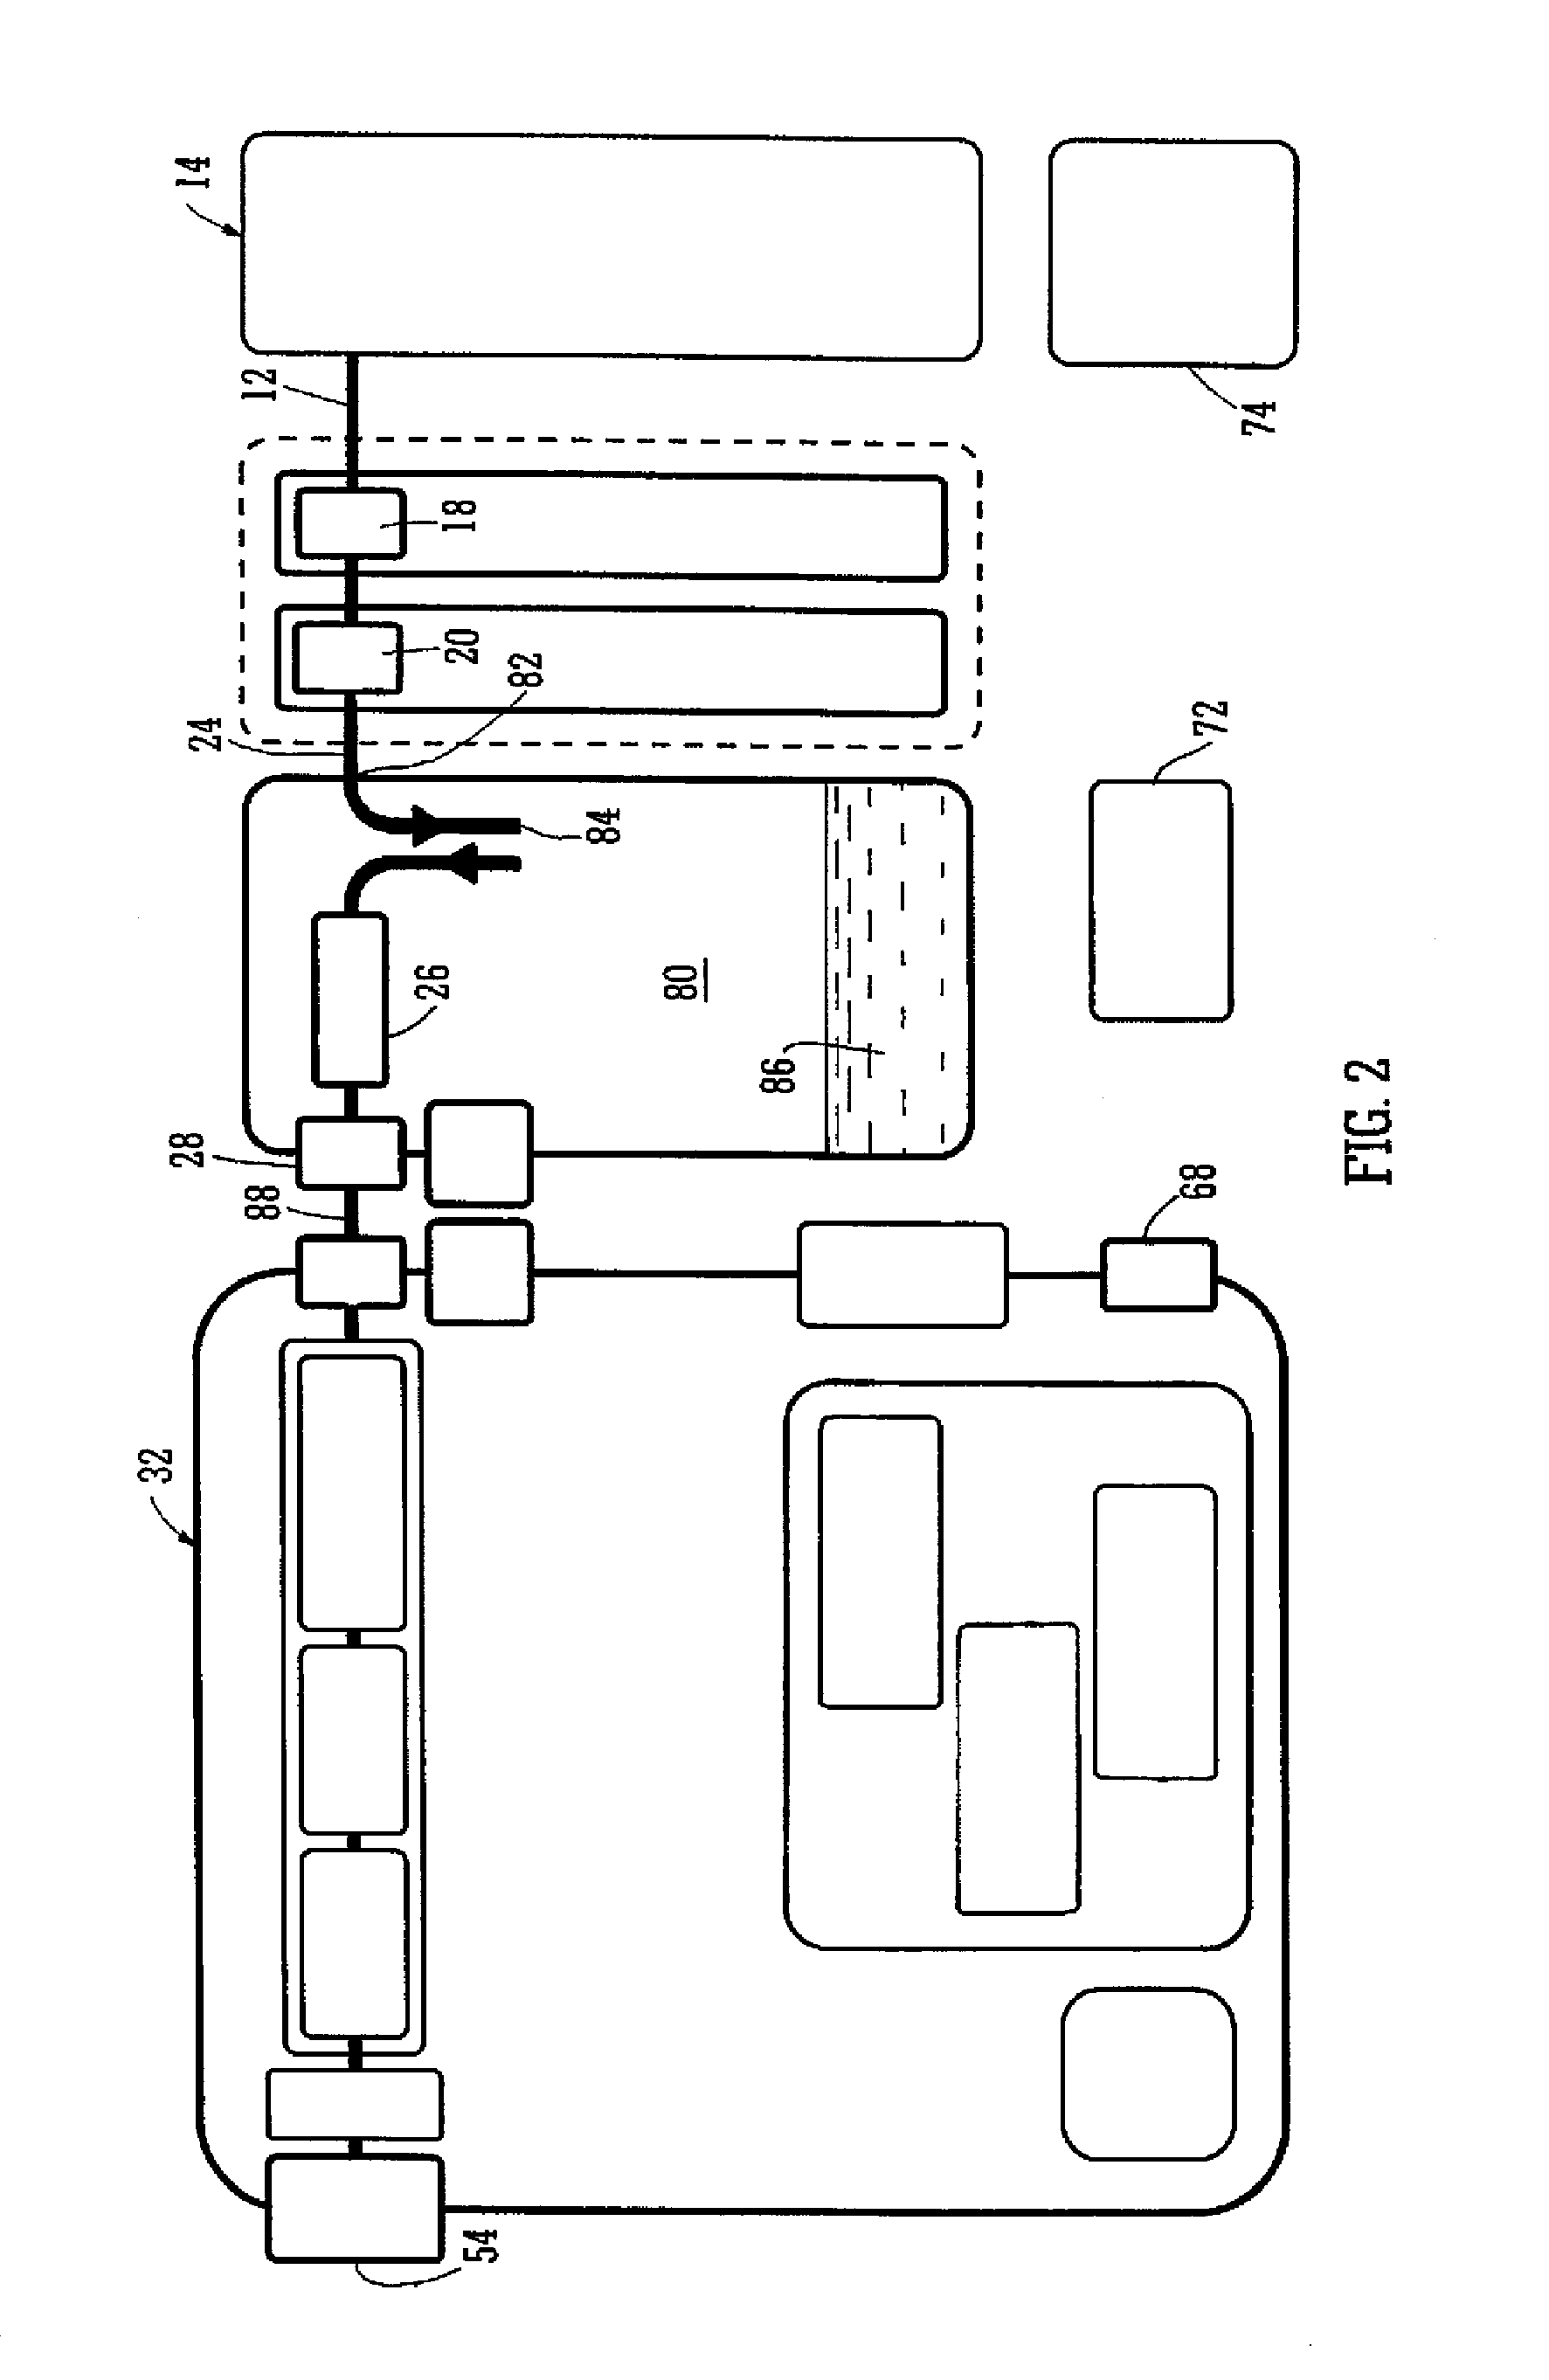 Apparatus and method for applying topical negative pressure